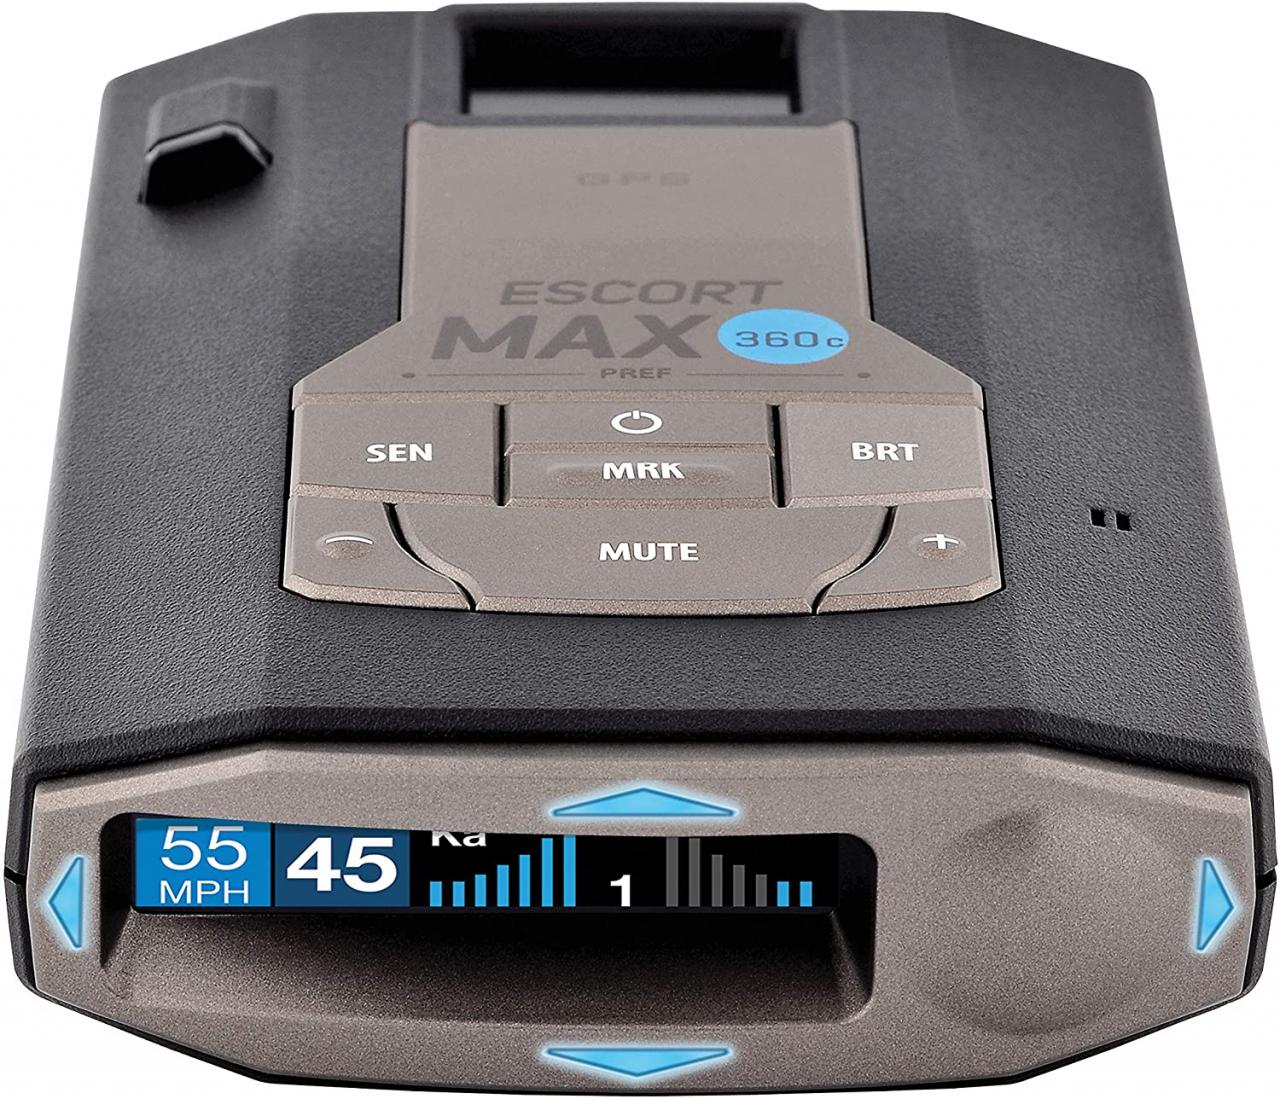 Buy Escort MAX360C Laser Radar Detector - WiFi and Bluetooth Enabled, 360°  Protection, Extreme Long Range, Voice Alerts, OLED Display, Live, Black  Online in Hong Kong. B078G12TWM